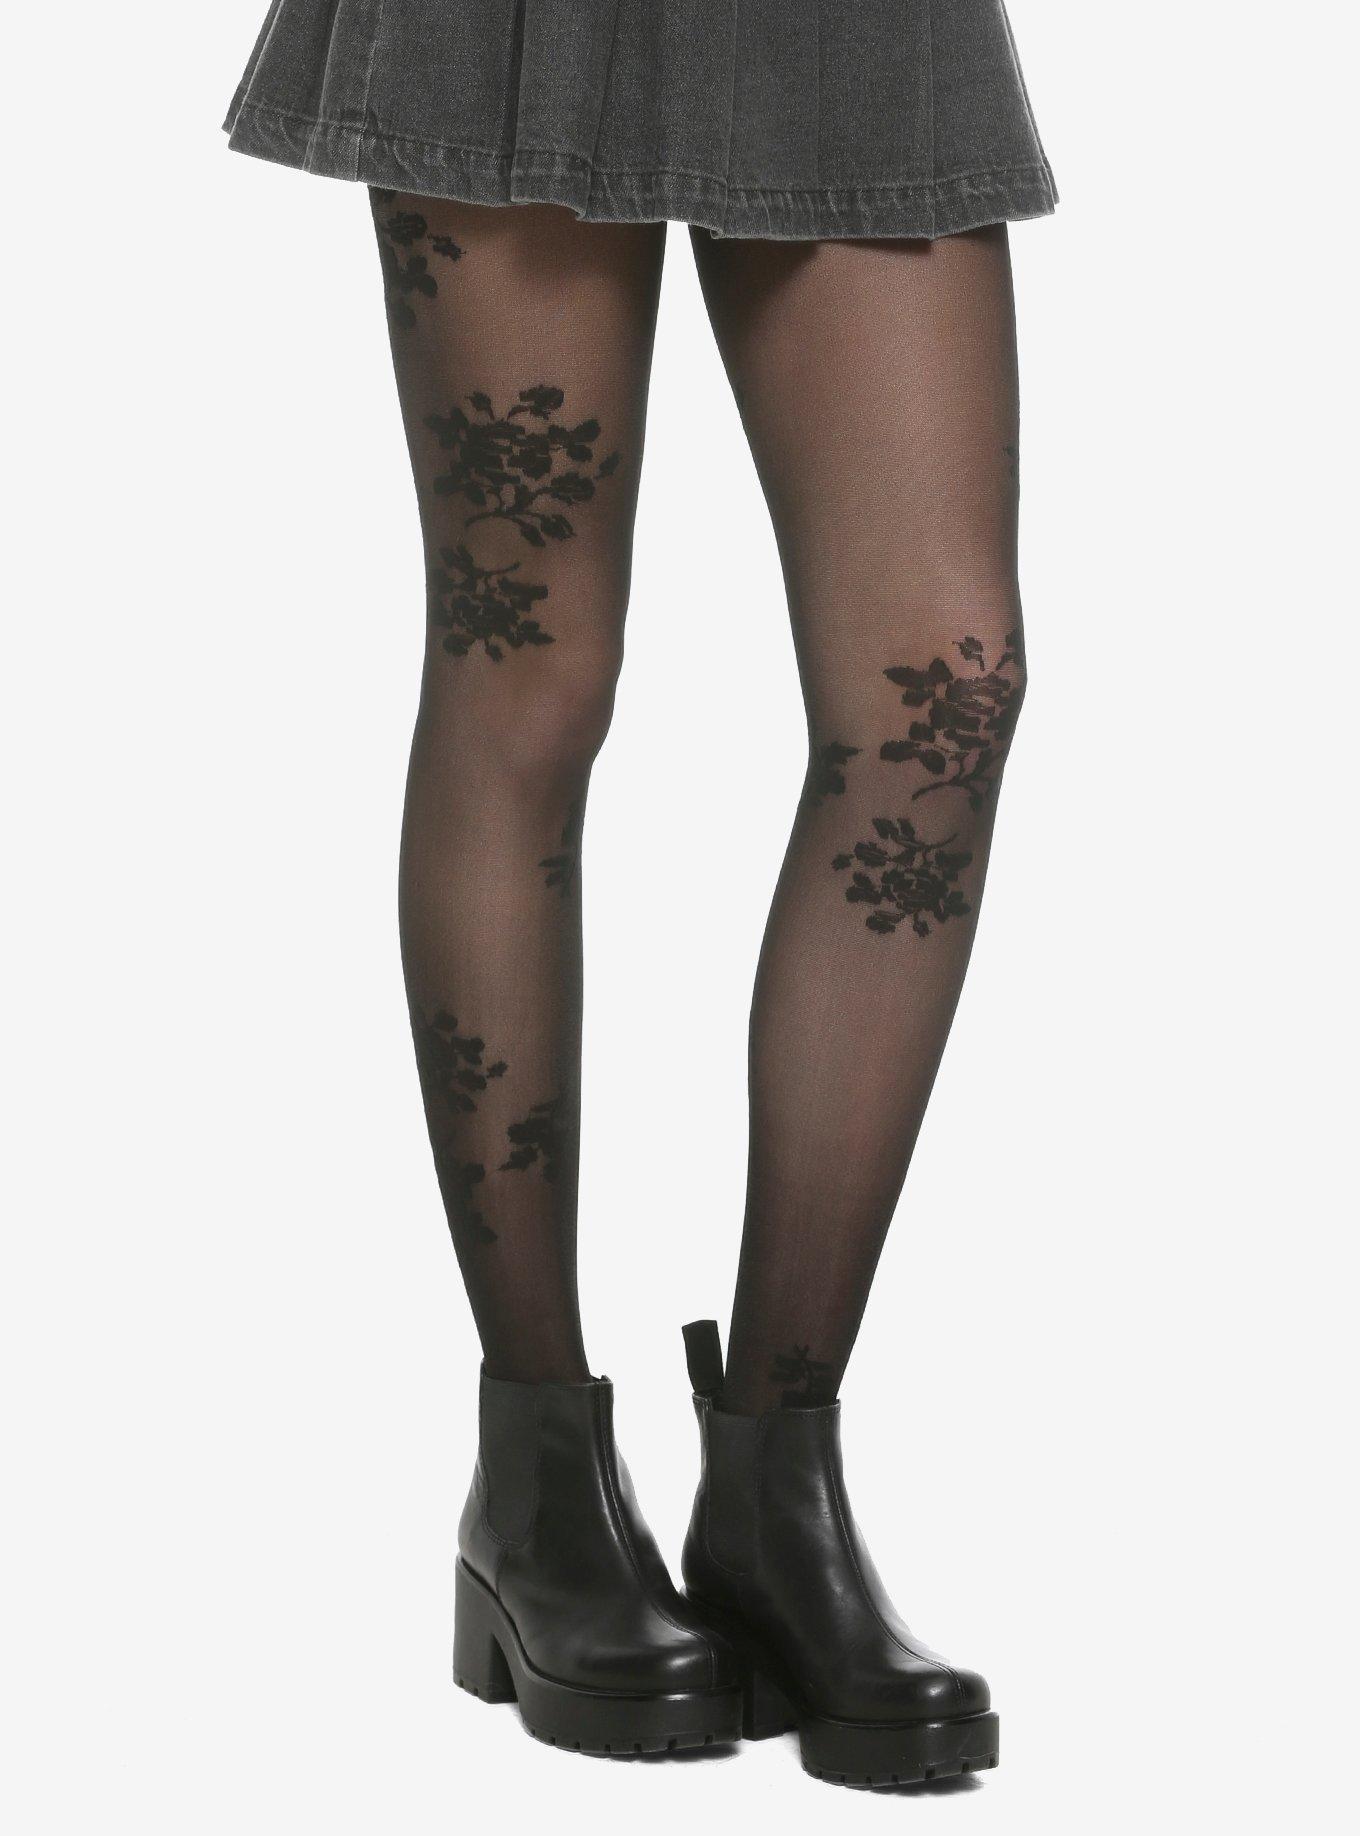 Sweetest Addition Black Floral Fishnet Tights